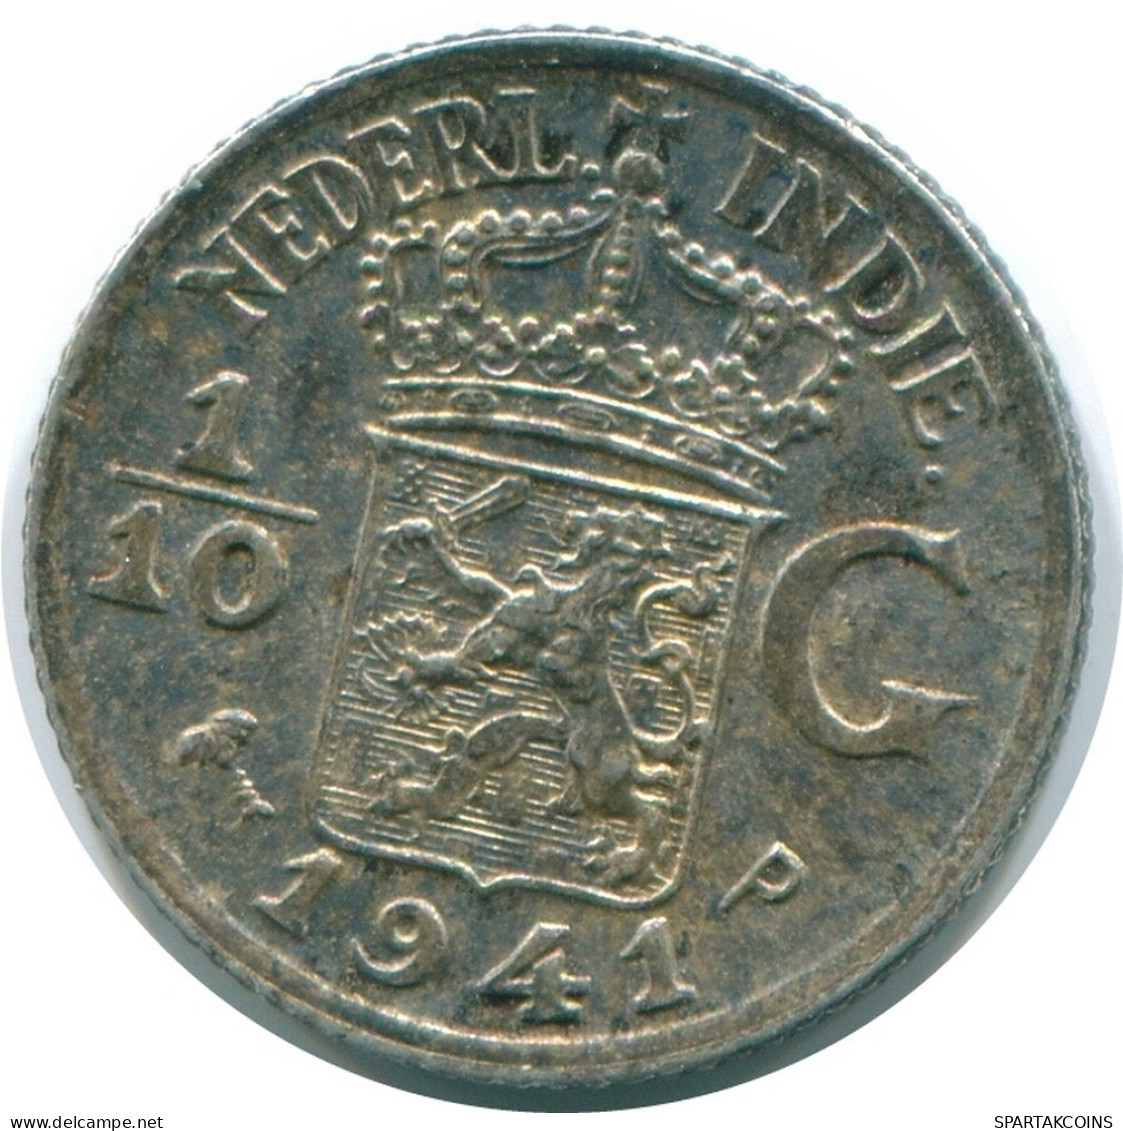 1/10 GULDEN 1941 P NETHERLANDS EAST INDIES SILVER Colonial Coin #NL13672.3.U.A - Indes Neerlandesas